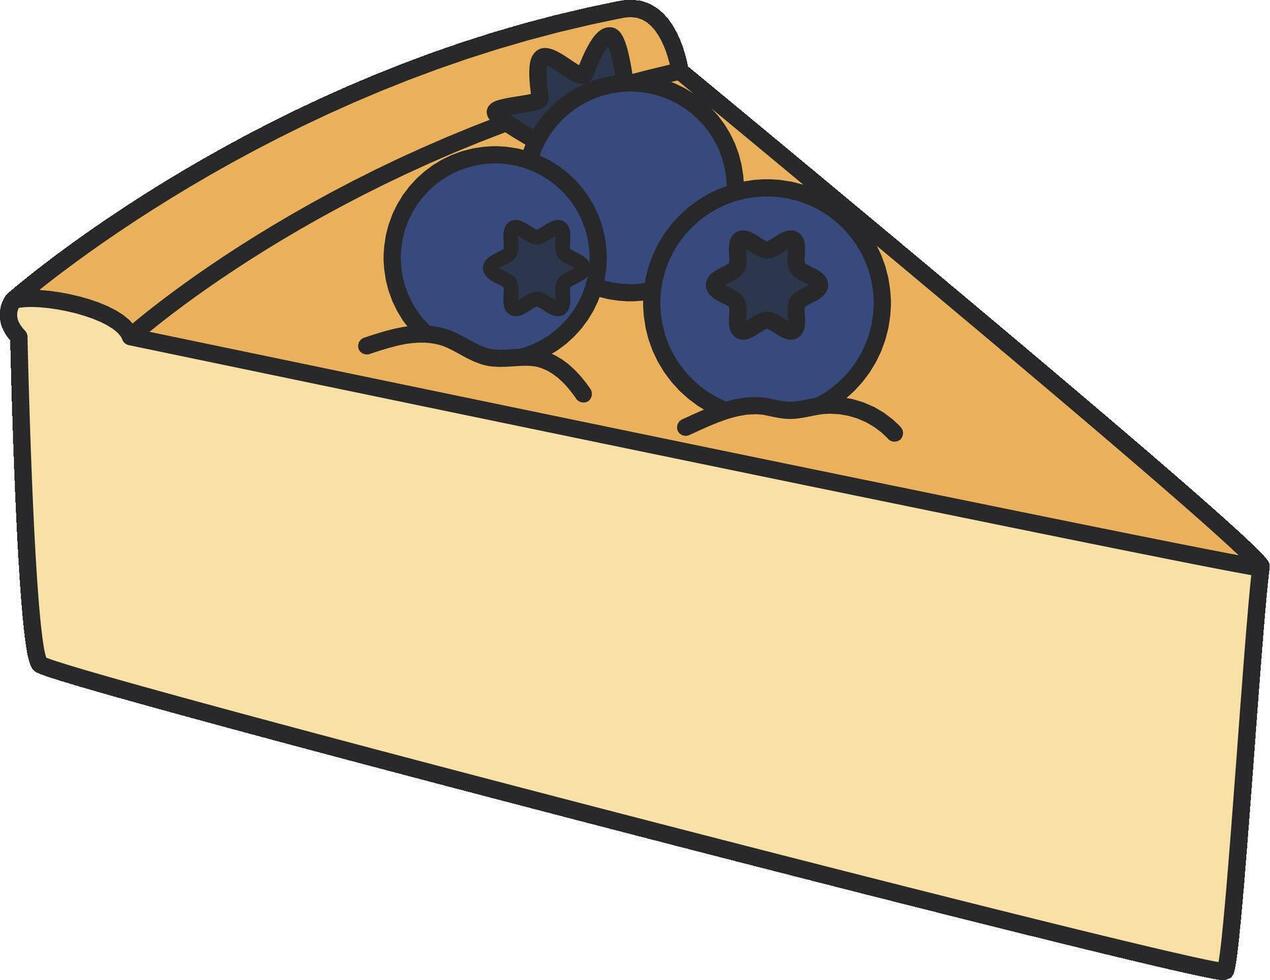 Cheesecake with blueberries icon in flat style on a white background vector